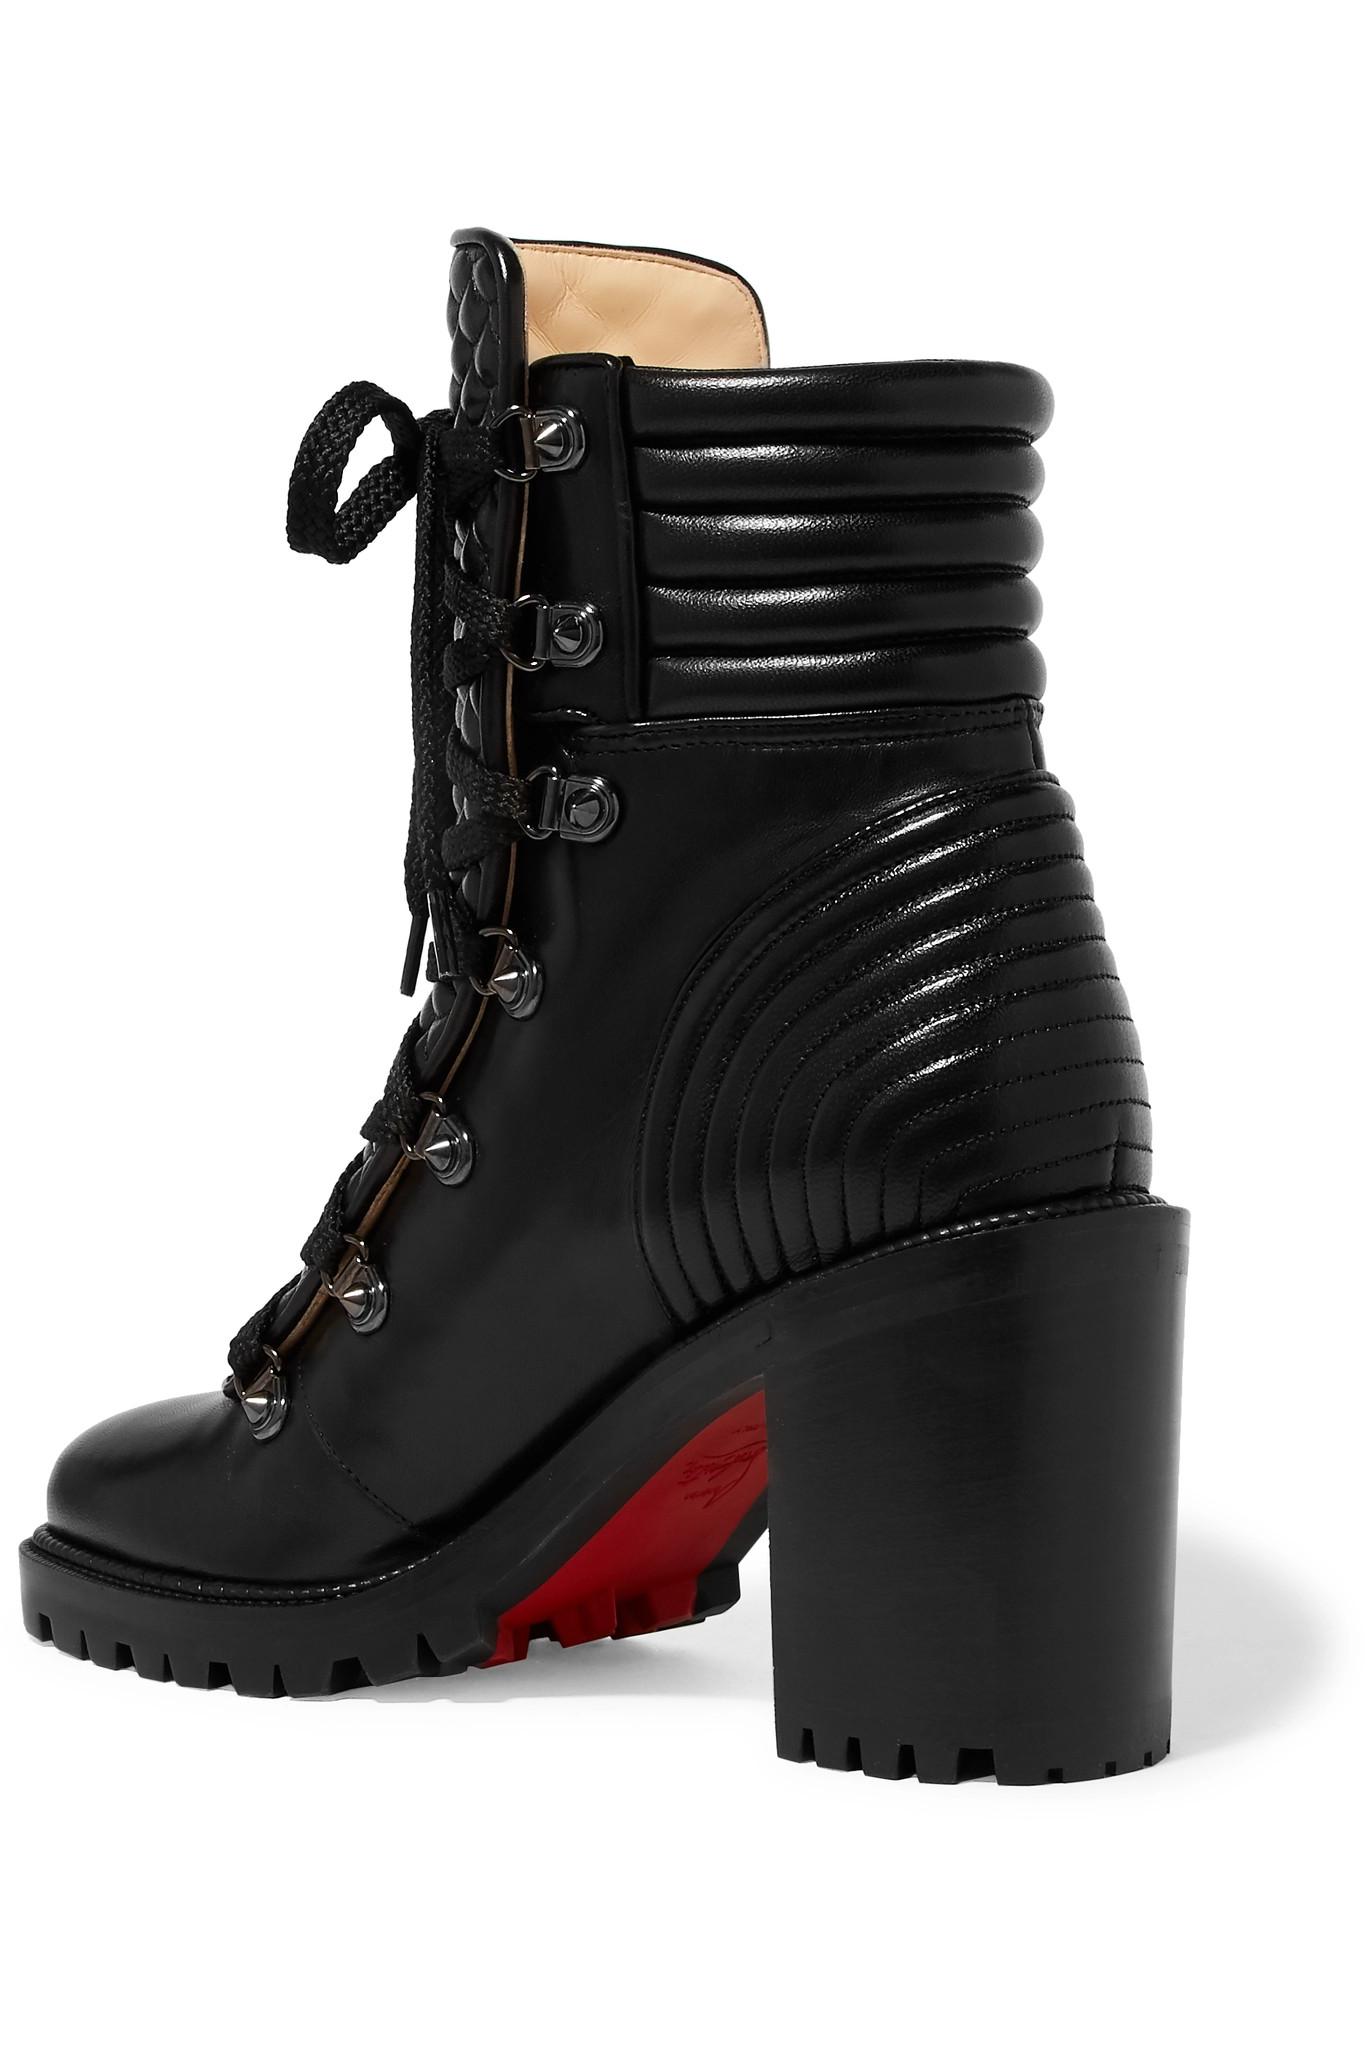 Christian Louboutin - Authenticated Boots - Leather Black for Women, Very Good Condition